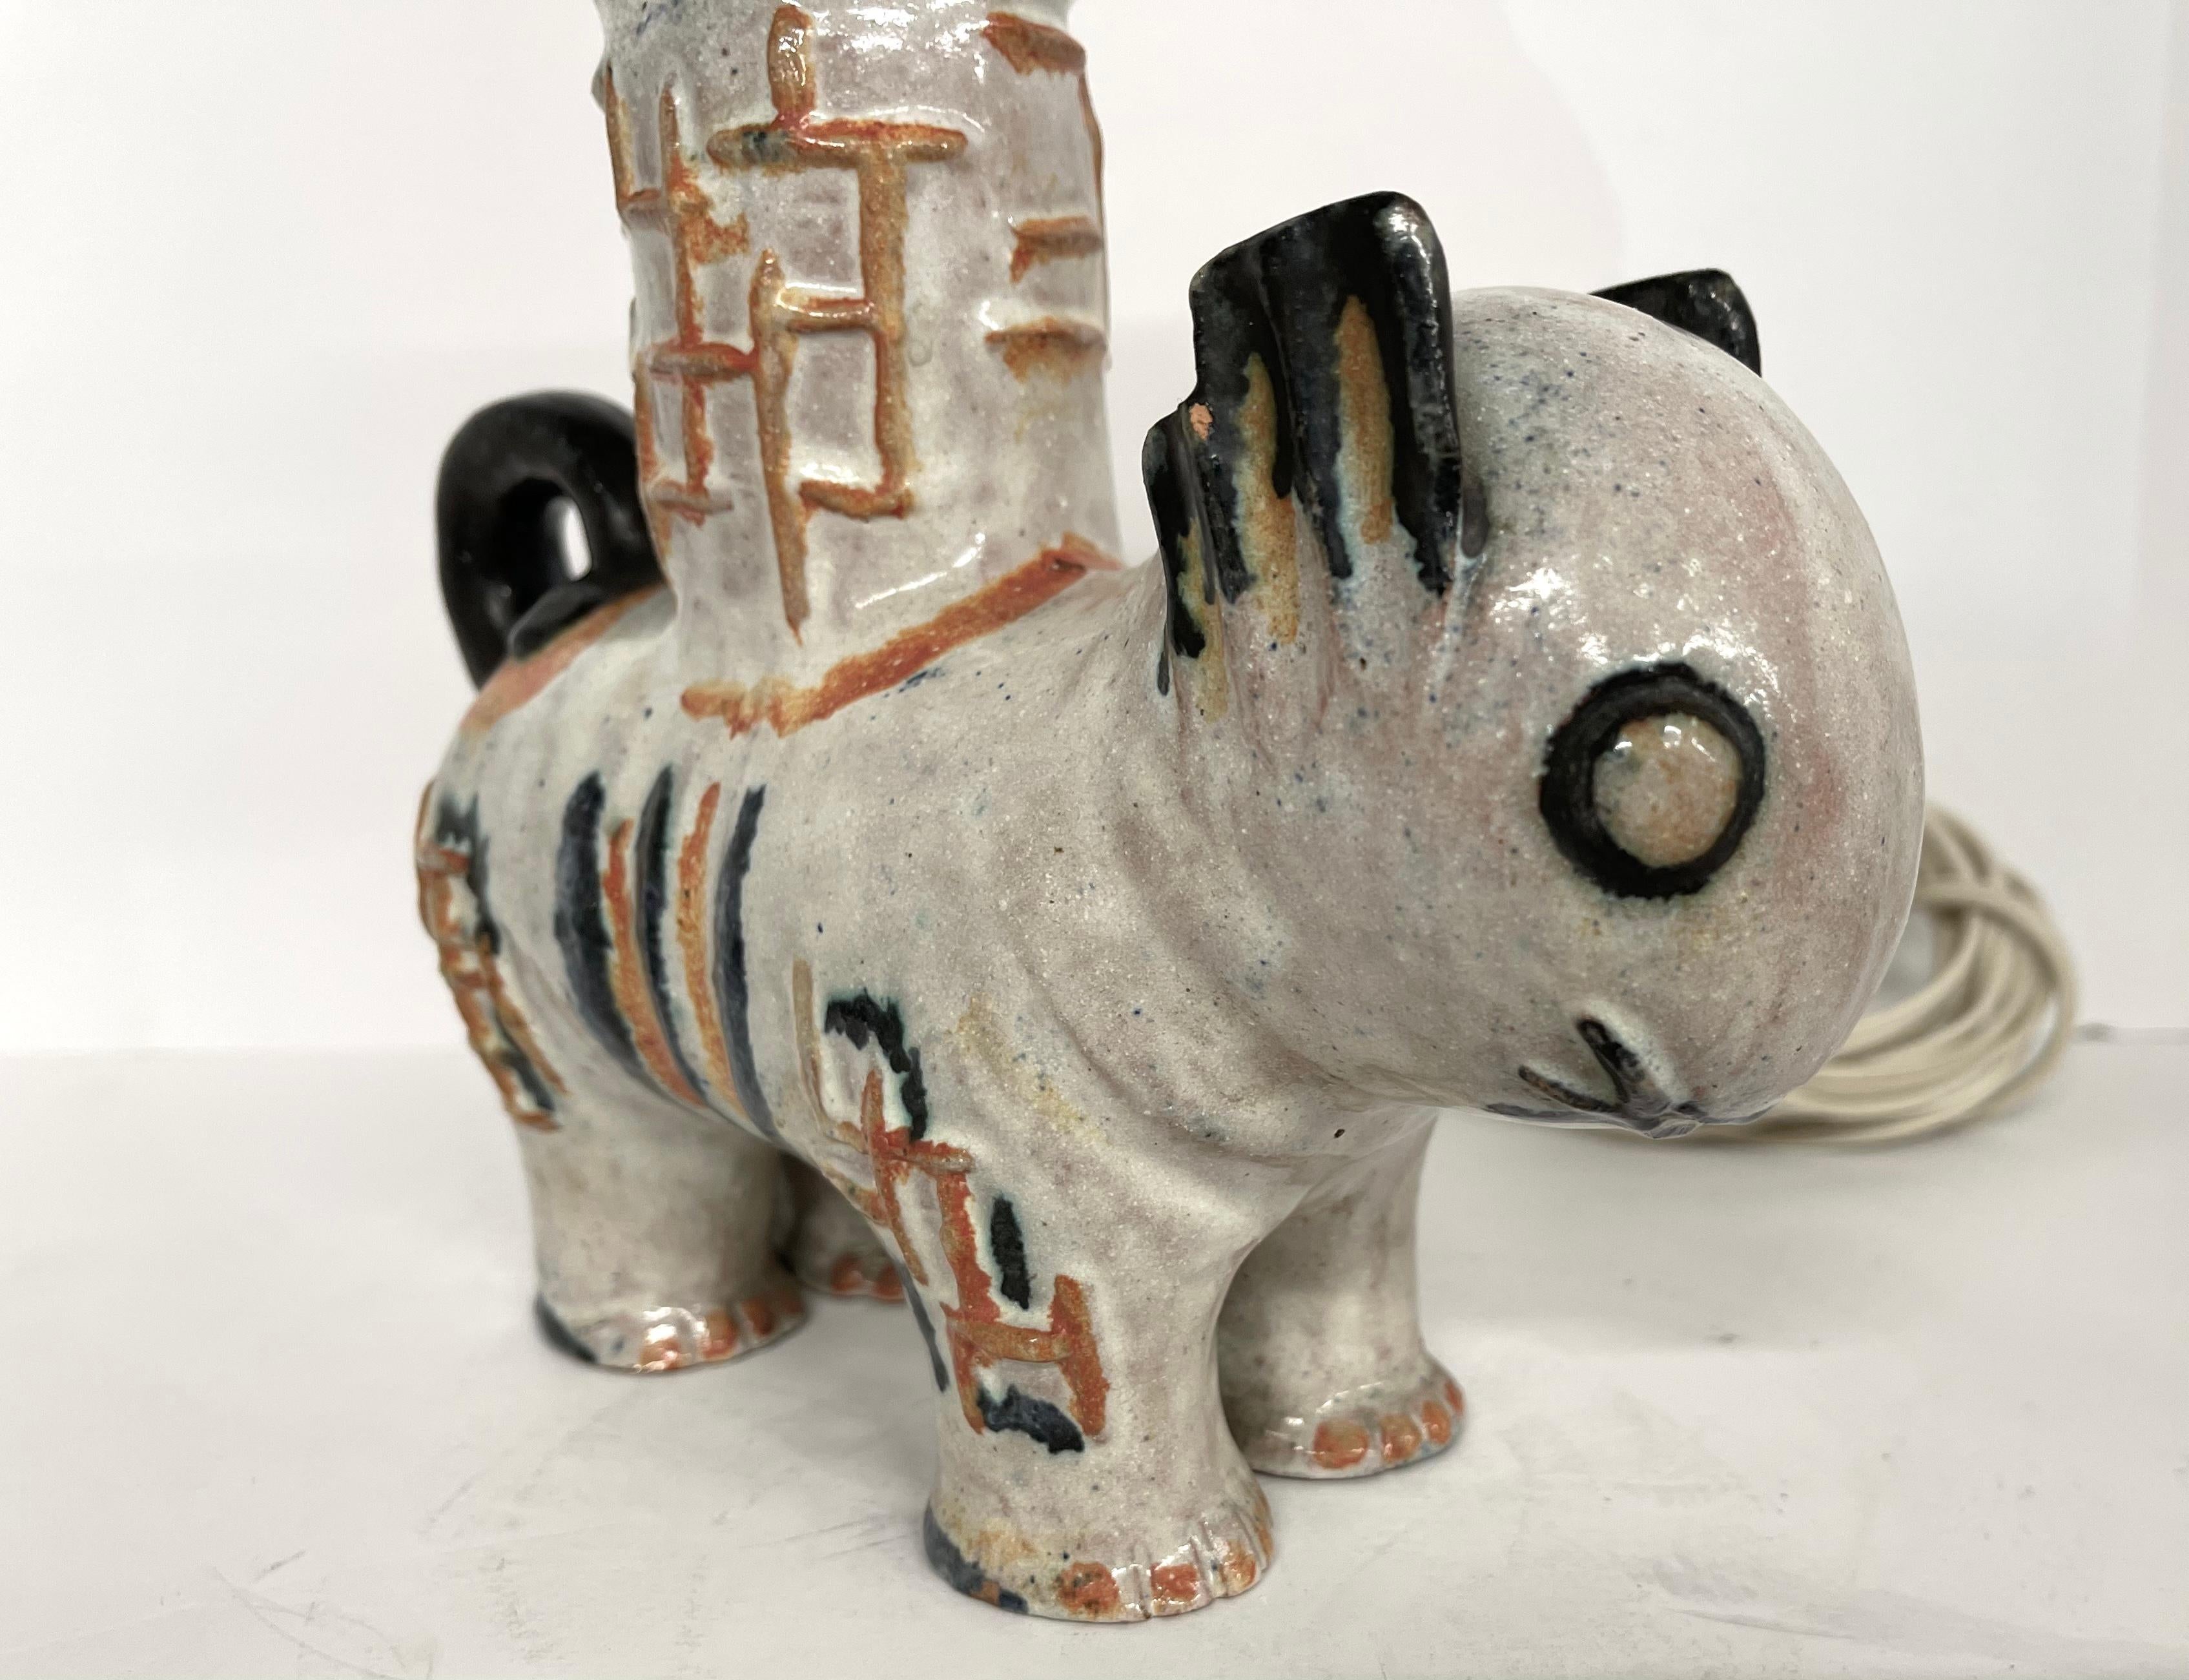 A wonderful ceramic, pottery cat designed by Kitty Rix and executed by the Wiener Werkstatte in the late 1920's. It was produced as a lamp and has an old leviton fixture and some newer wiring. In good original condition with no chips that I have